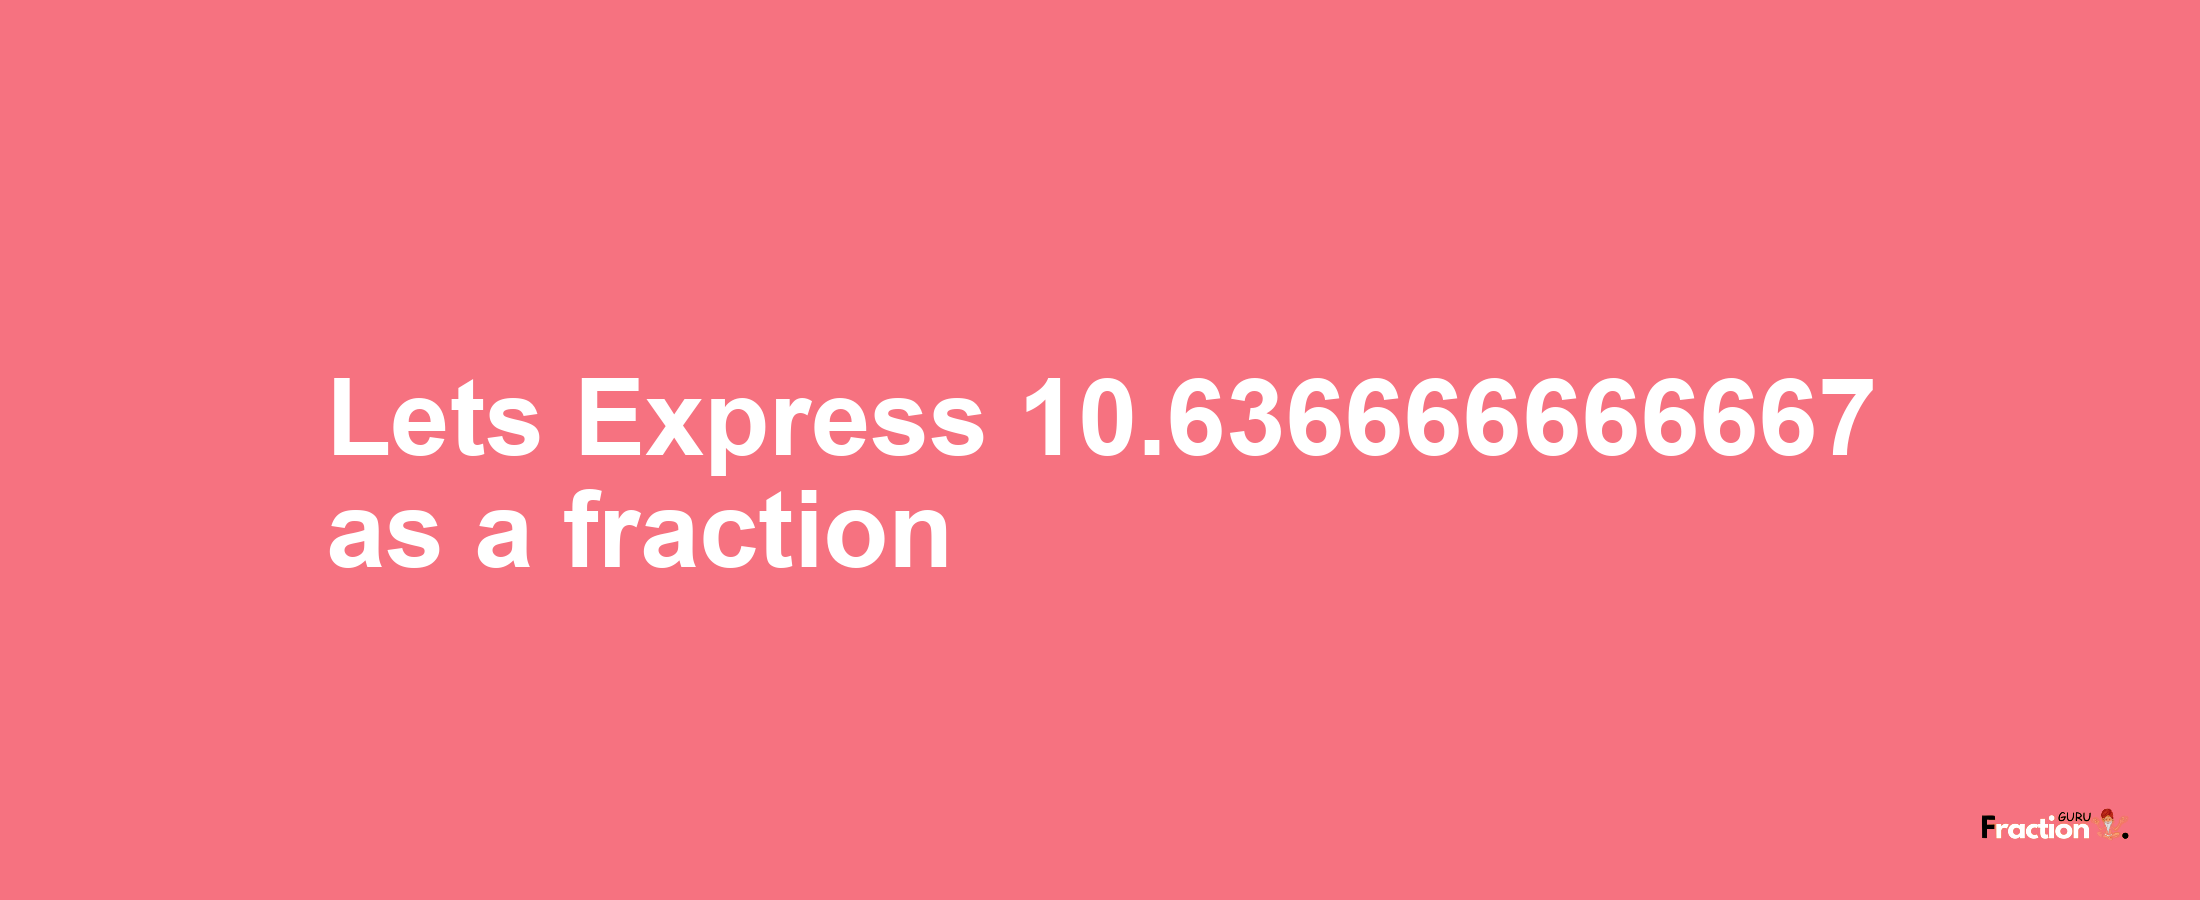 Lets Express 10.636666666667 as afraction